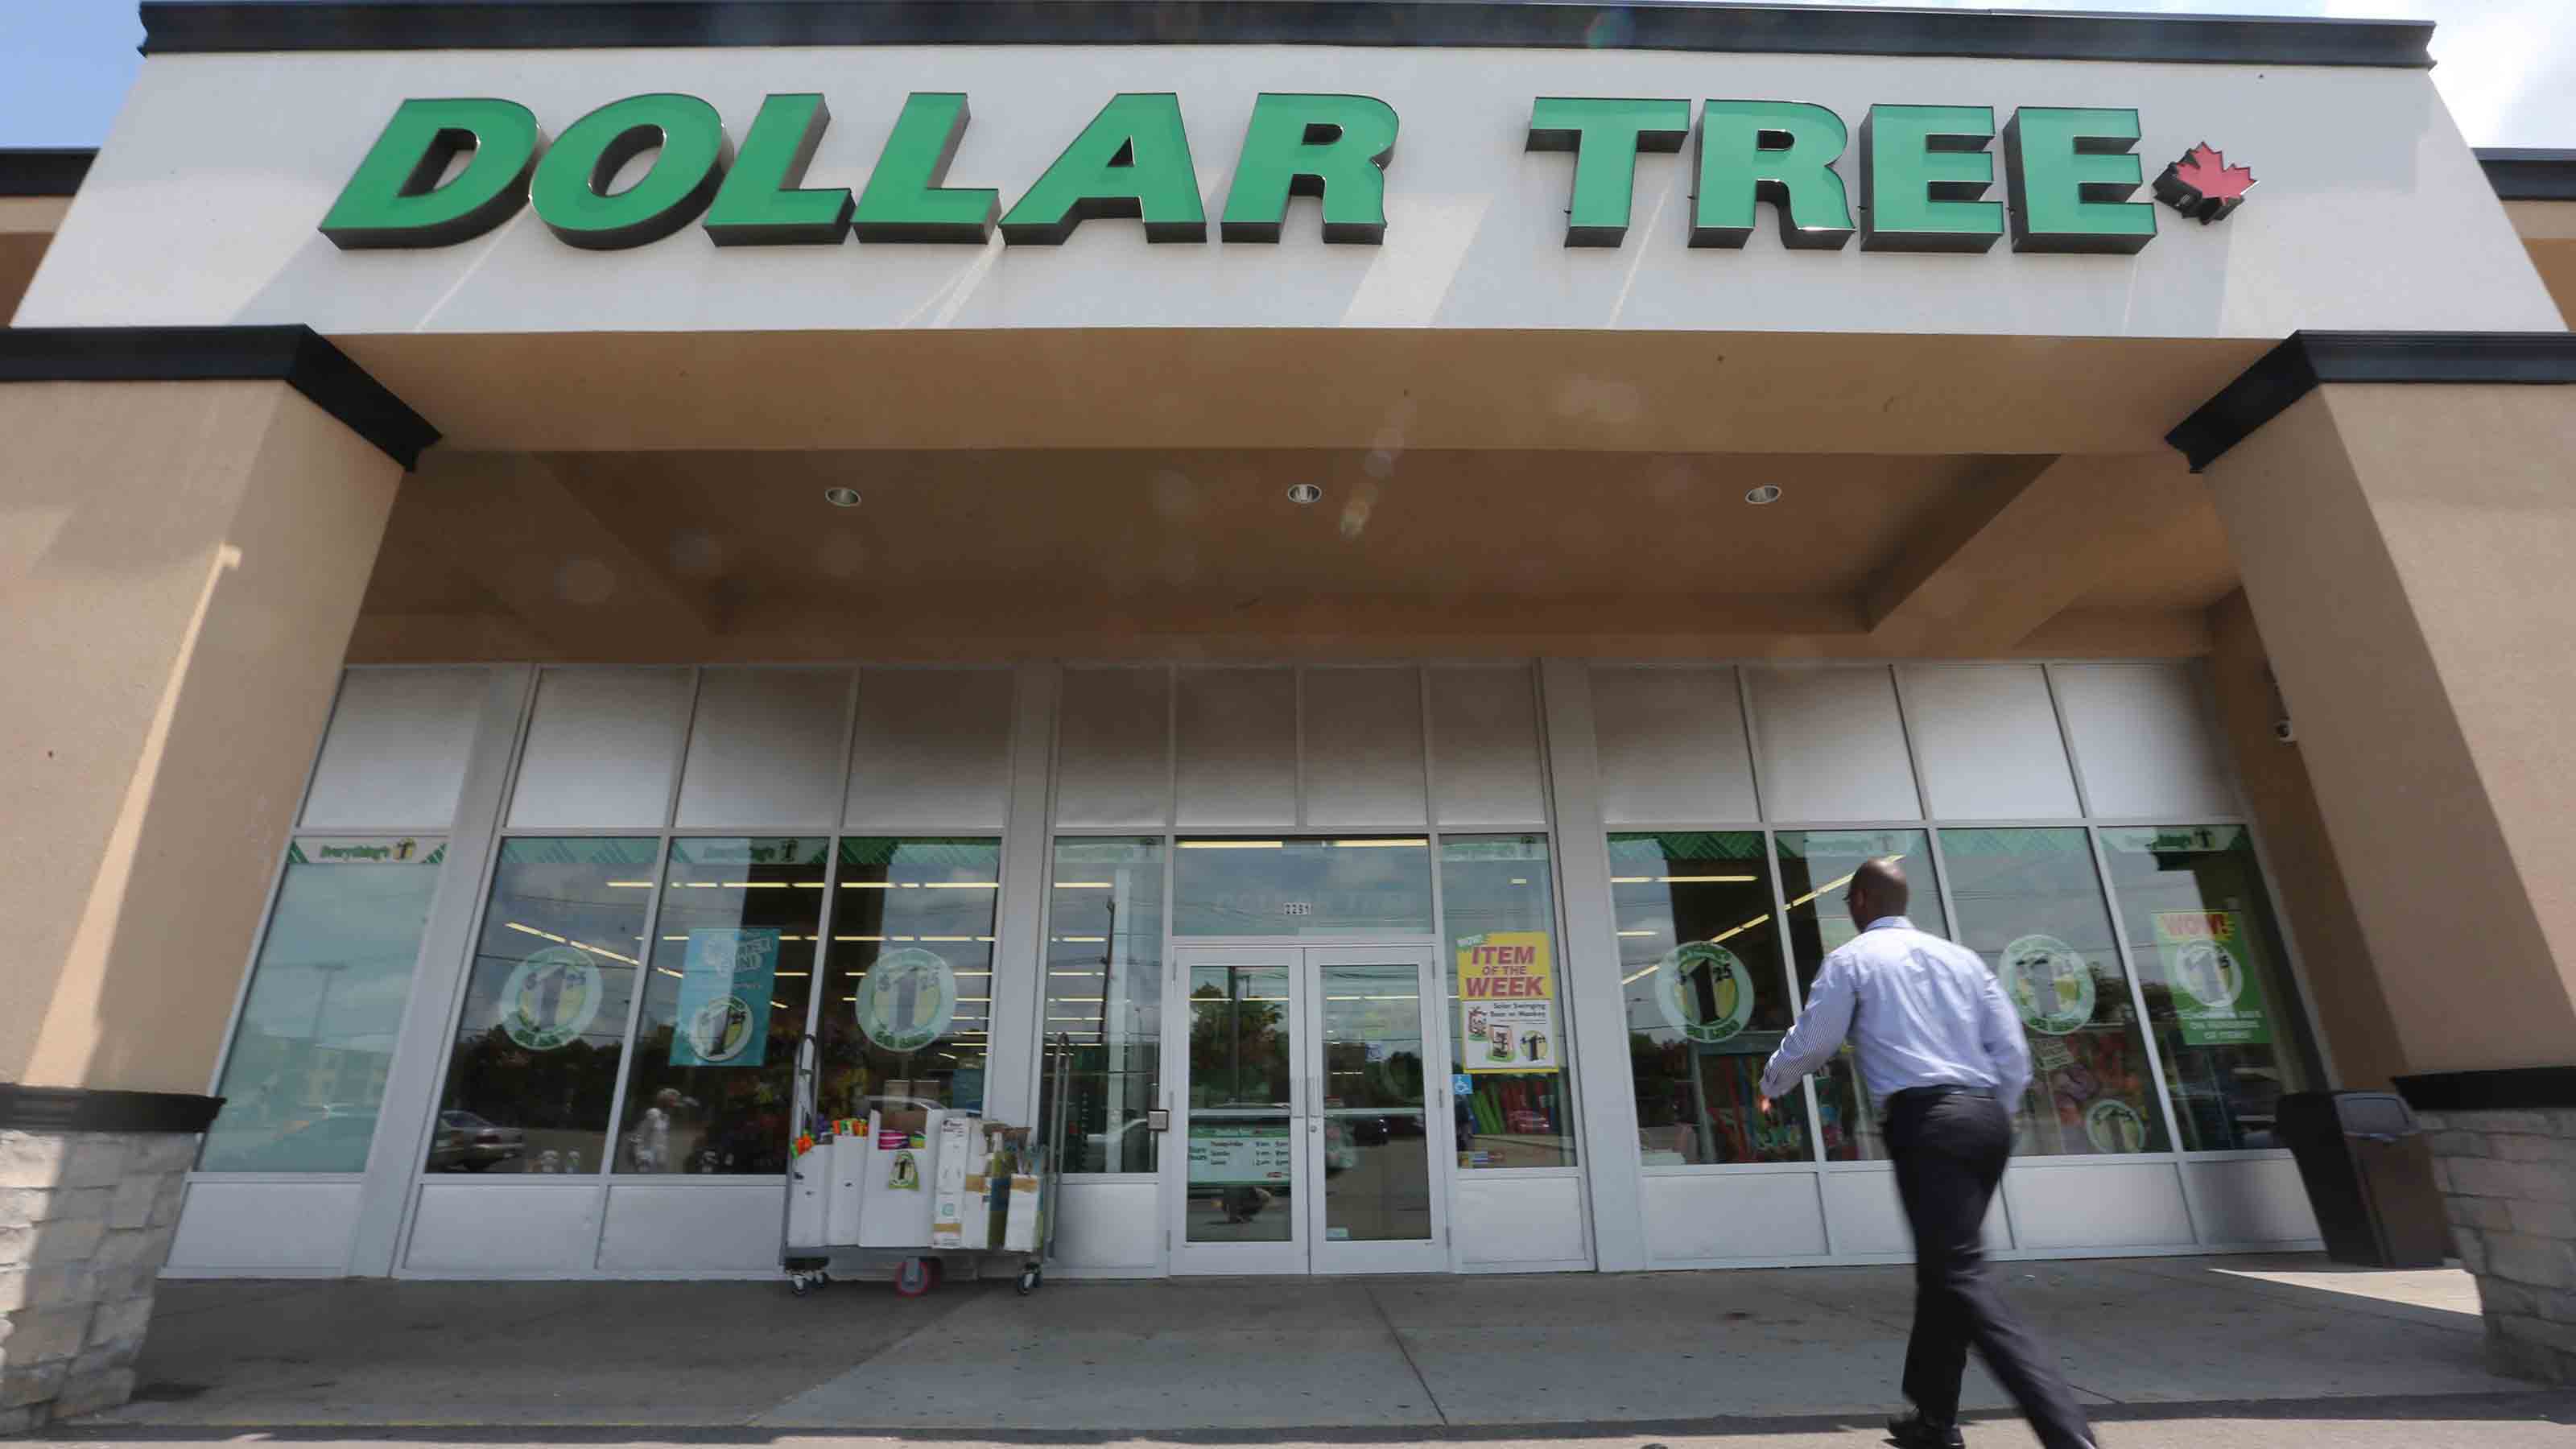 Enhance Your Shopping Experience with Top Picks from Dollar Tree Plus Under  $5